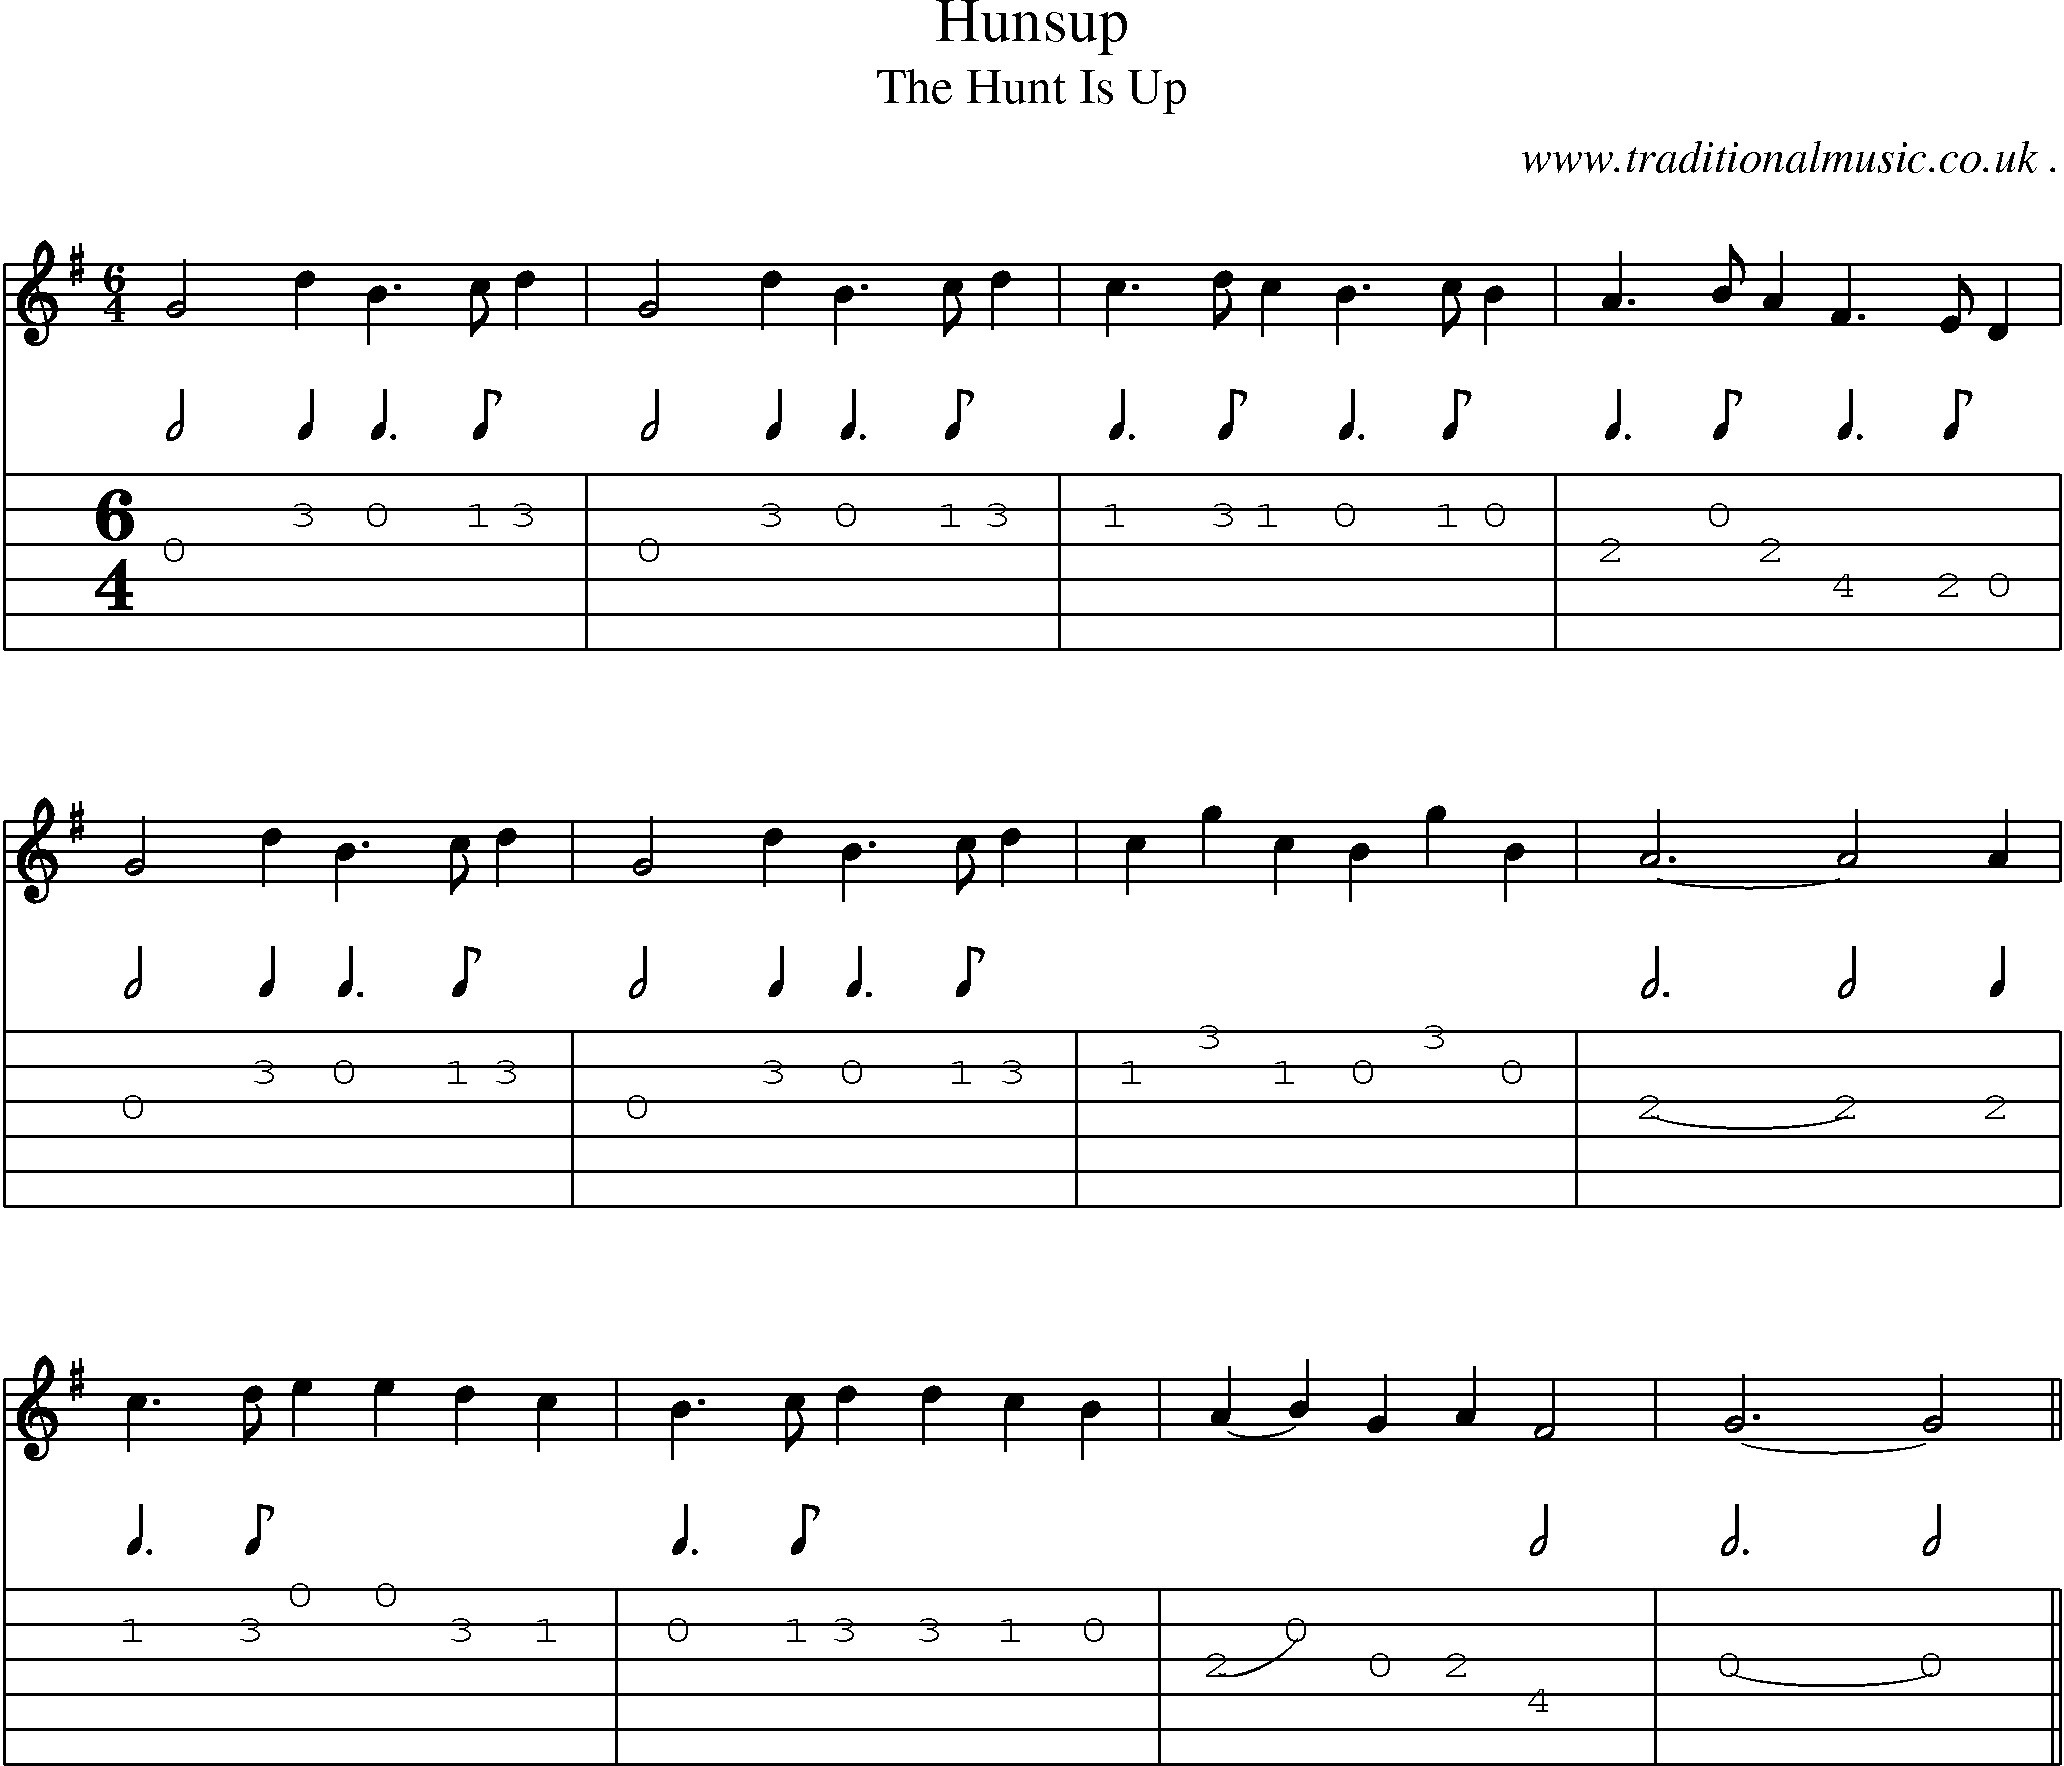 Sheet-Music and Guitar Tabs for Hunsup